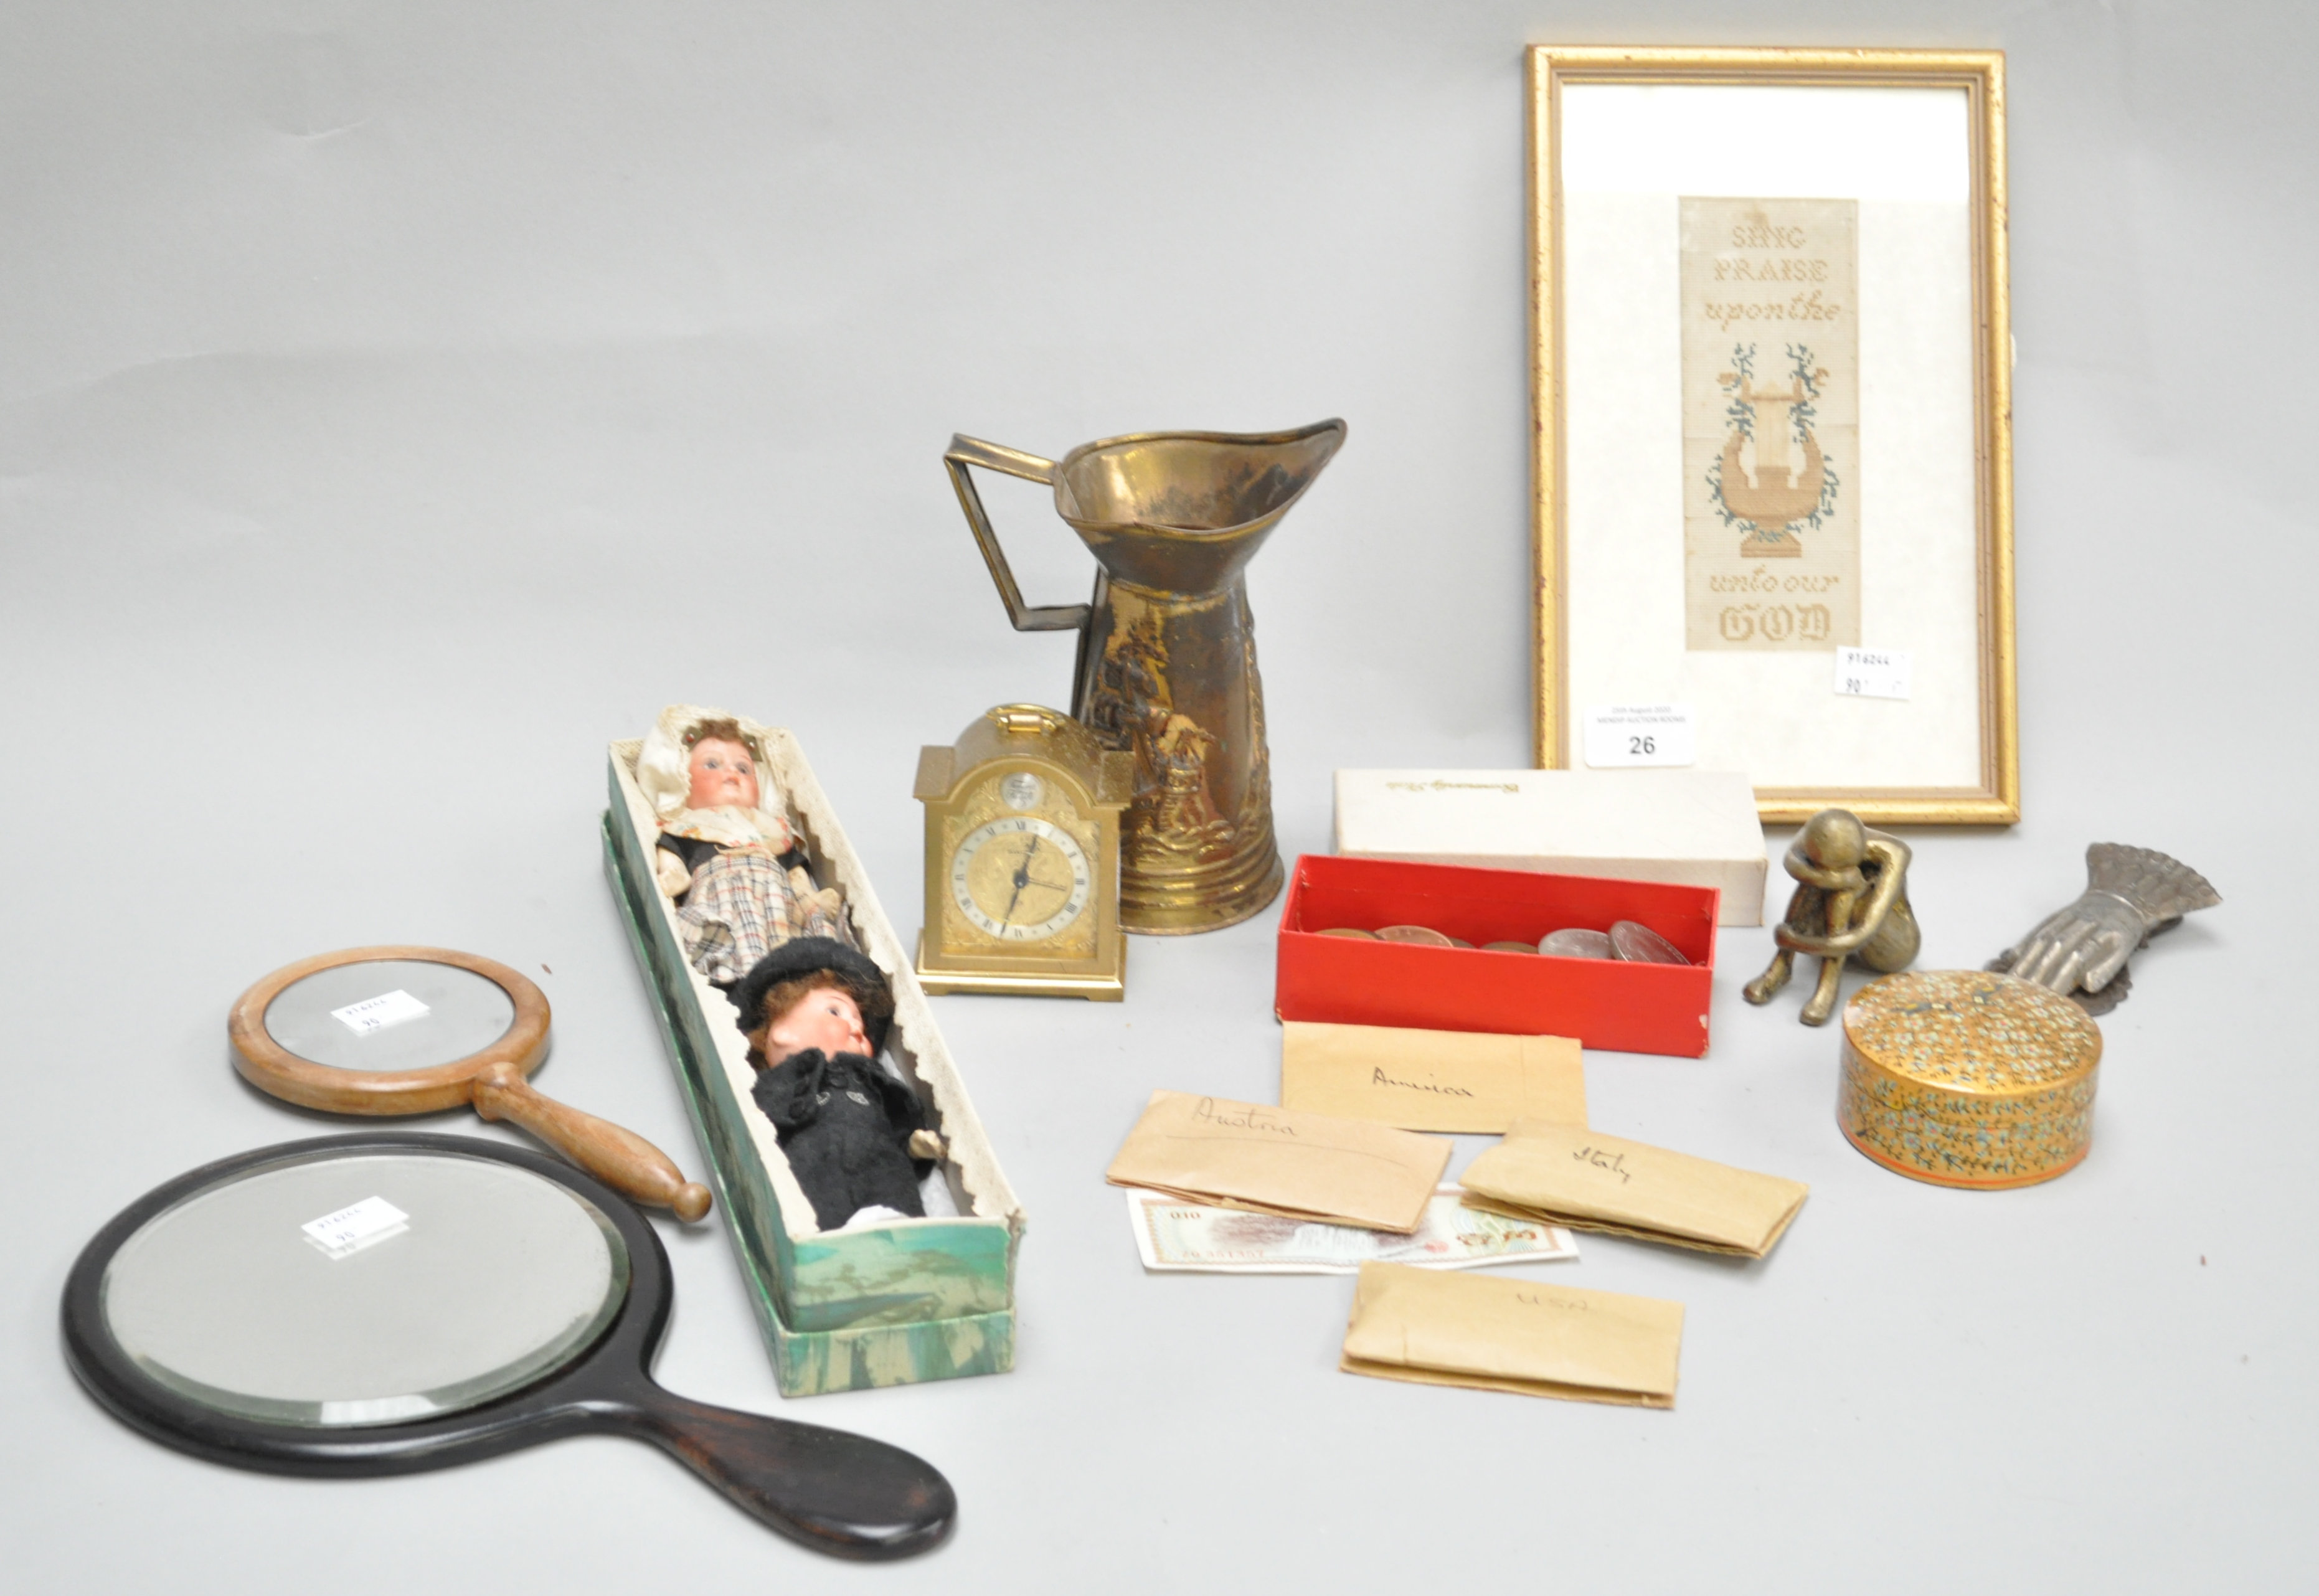 A collection of assorted curios, to include German porcelain headed dolls, papier mache pot,